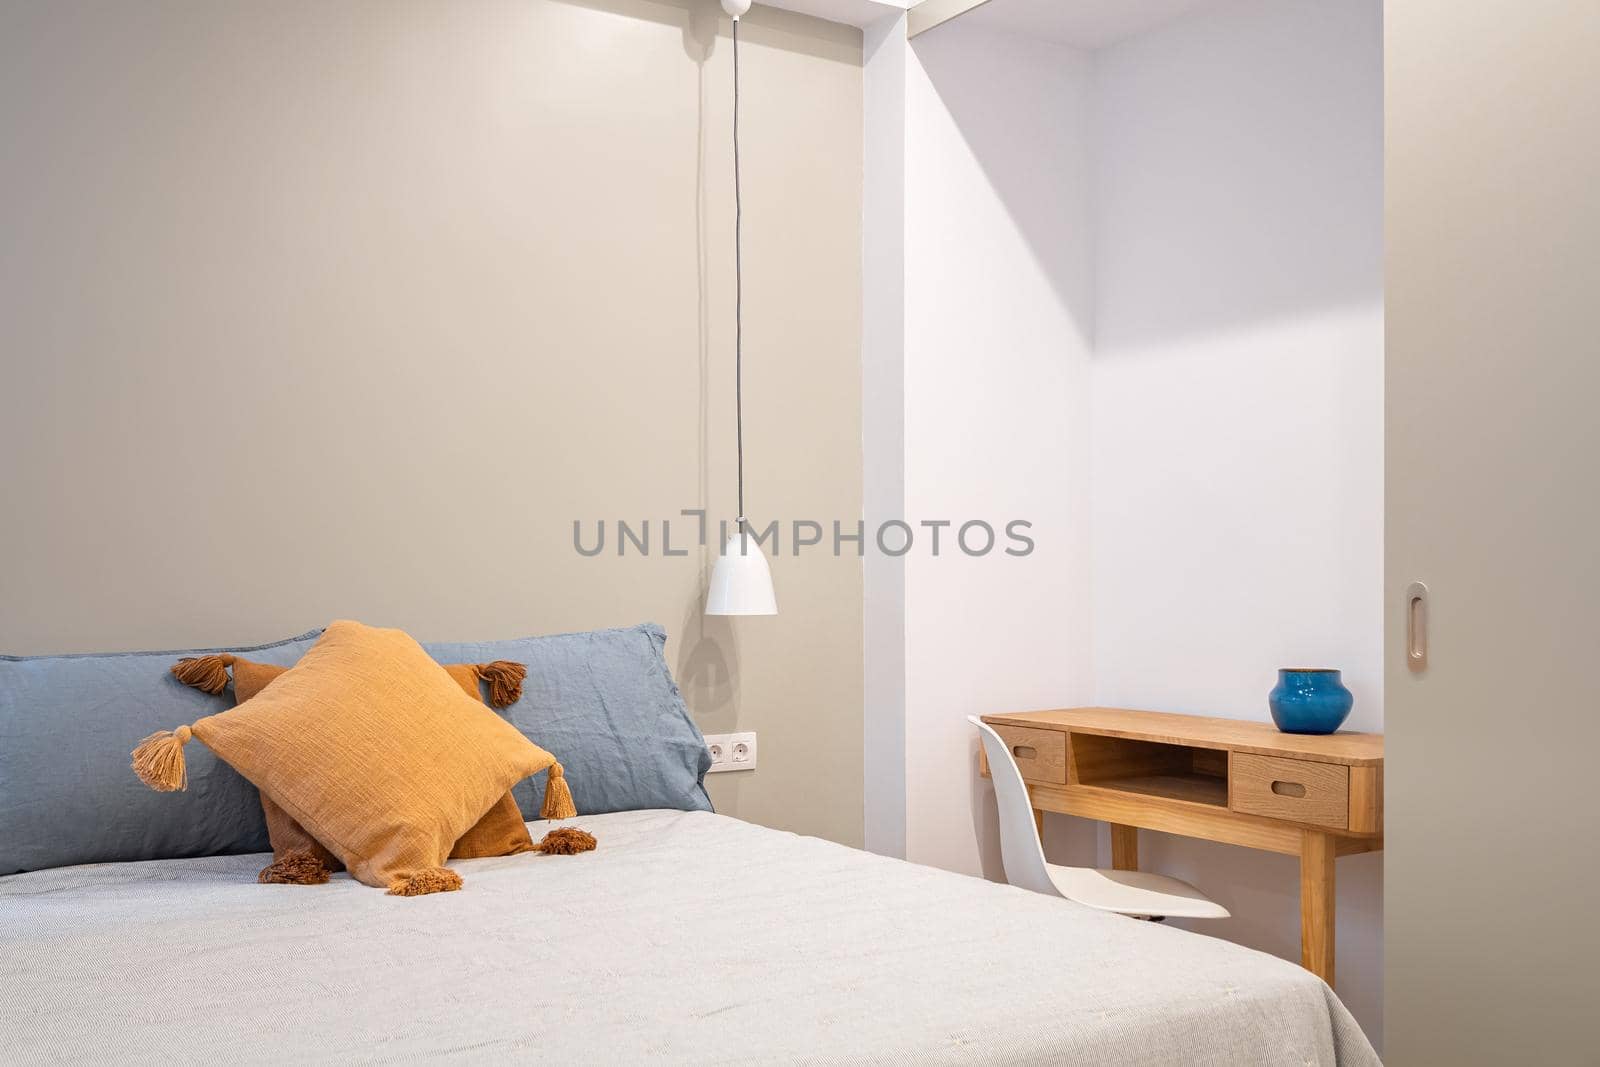 Interior of new bedroom with small working table and window. Bright room with pleasant and calm colors